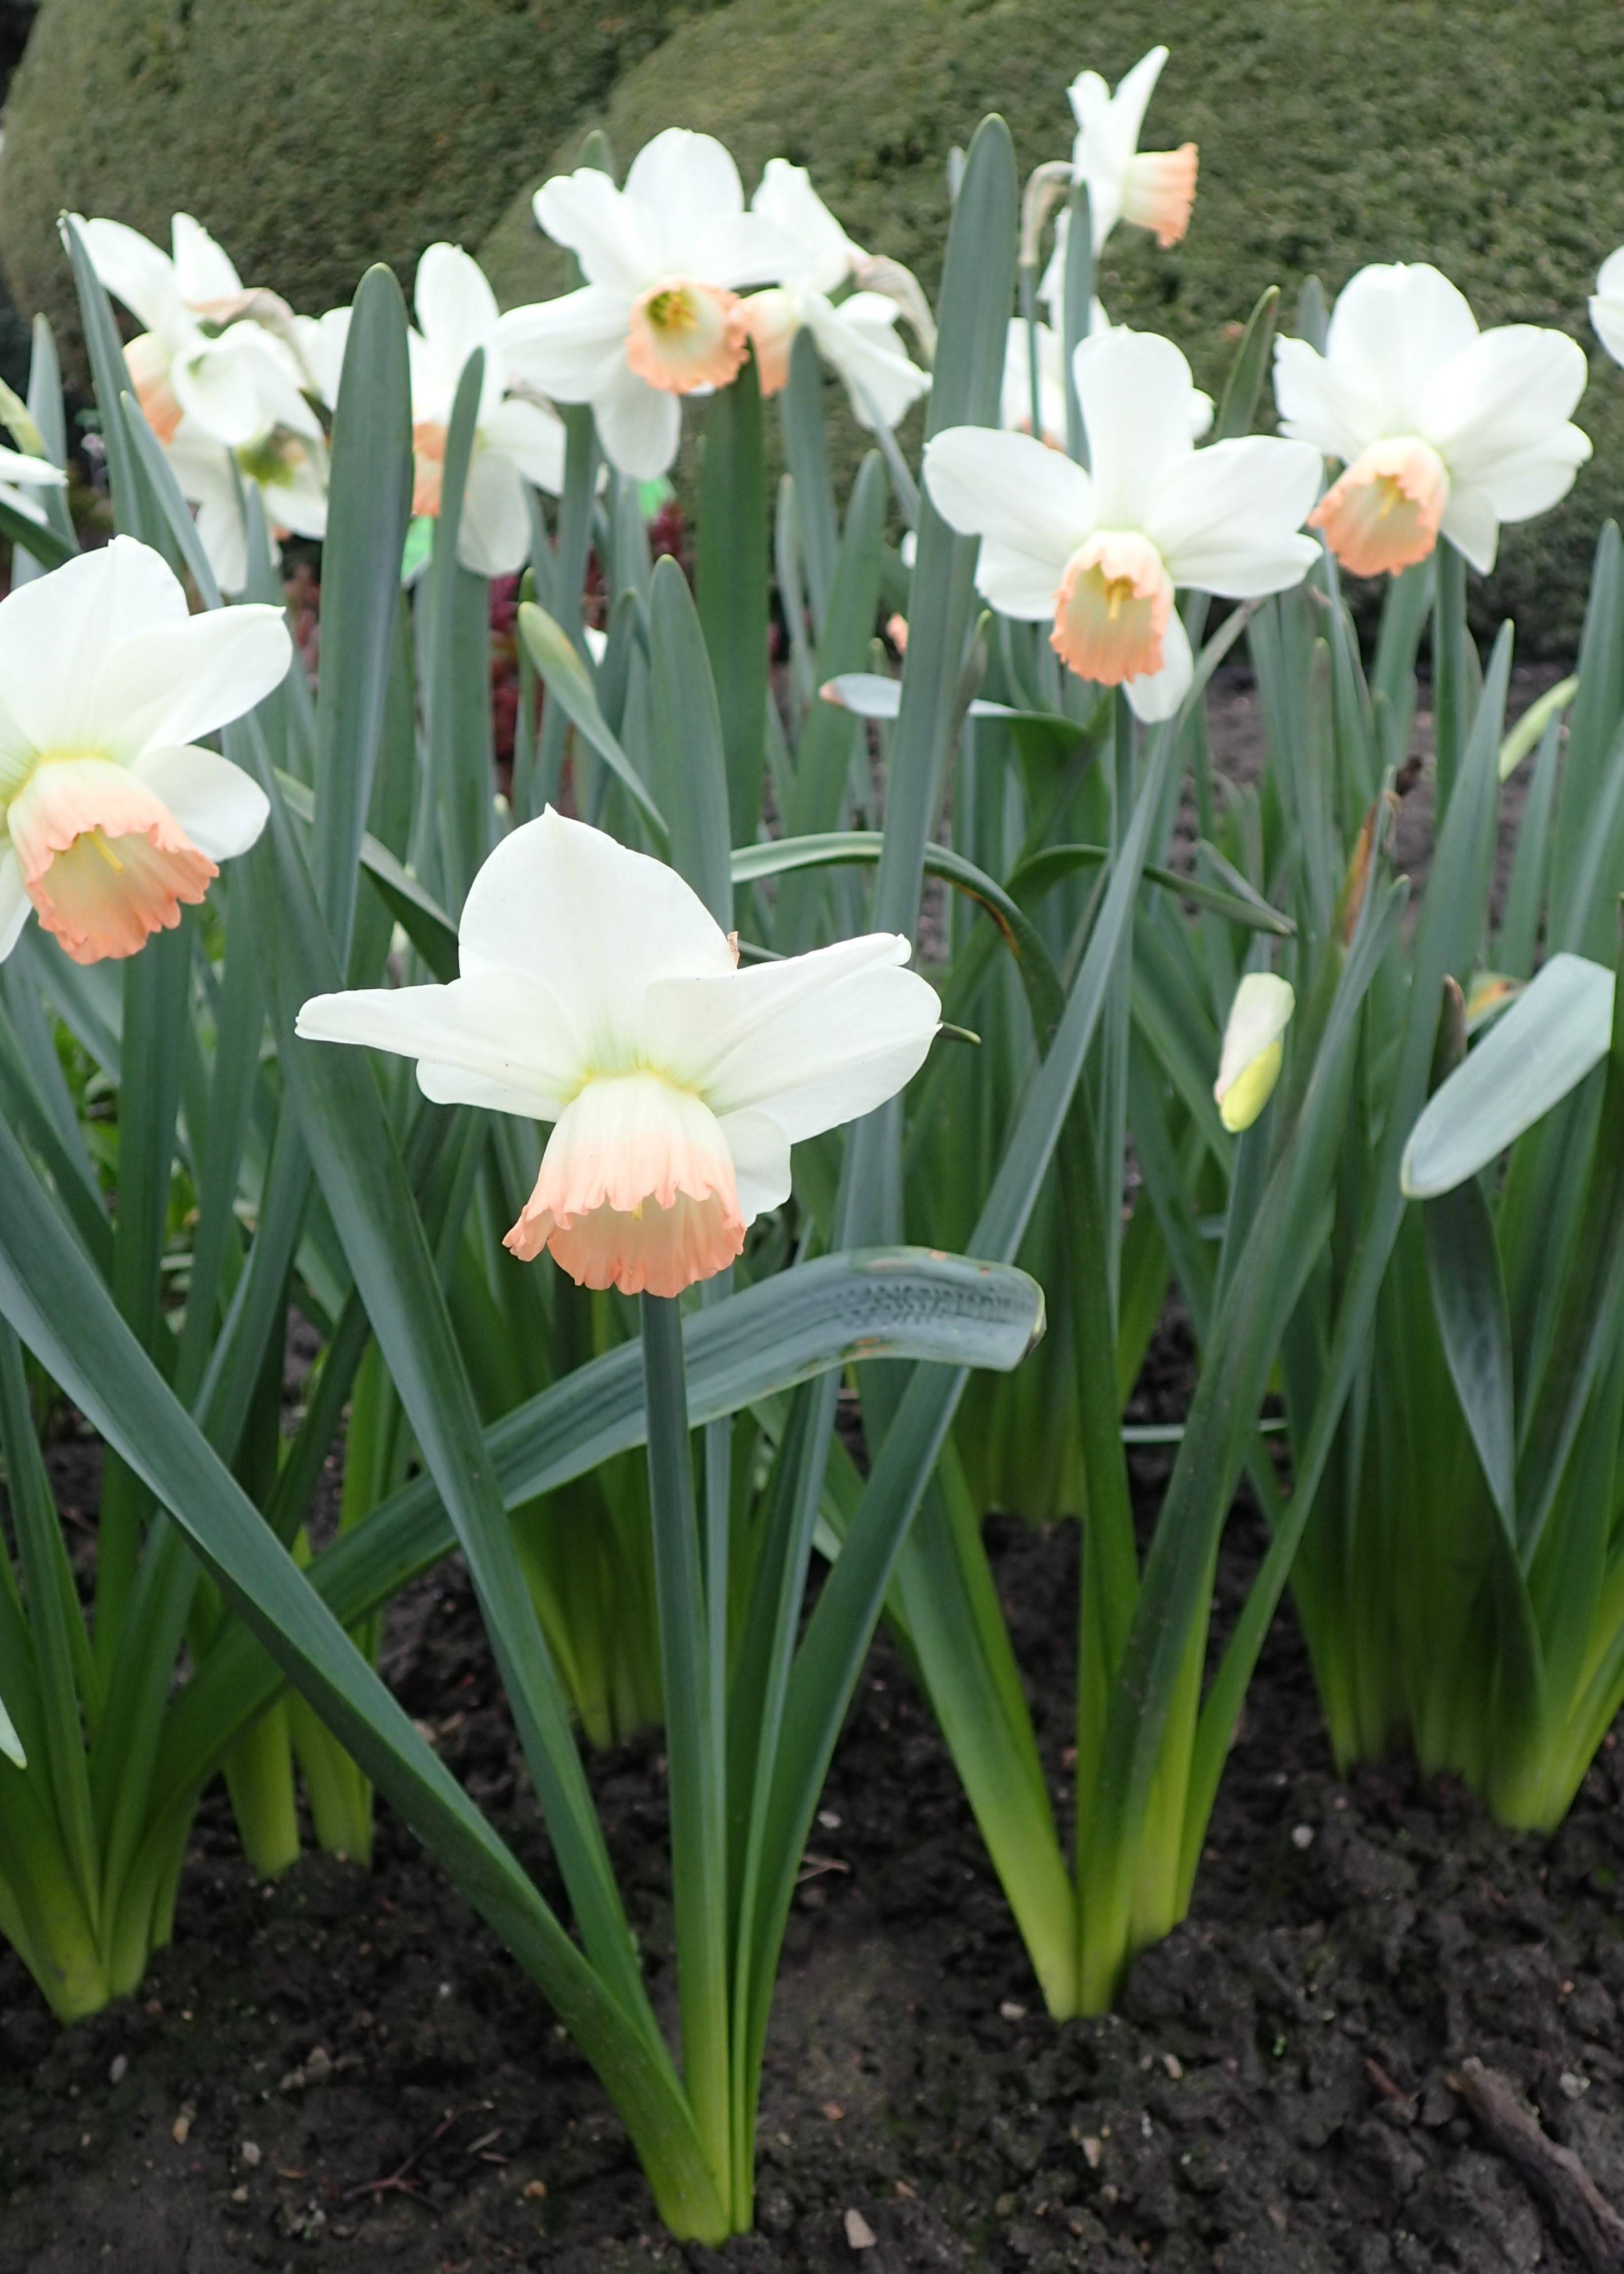 Narcissus 'Easter Bonnet'; white-pink flowers with tea-pink, cup-shaped corona, long, slender, blue-green stems, and blue-green, long, narrow leaves